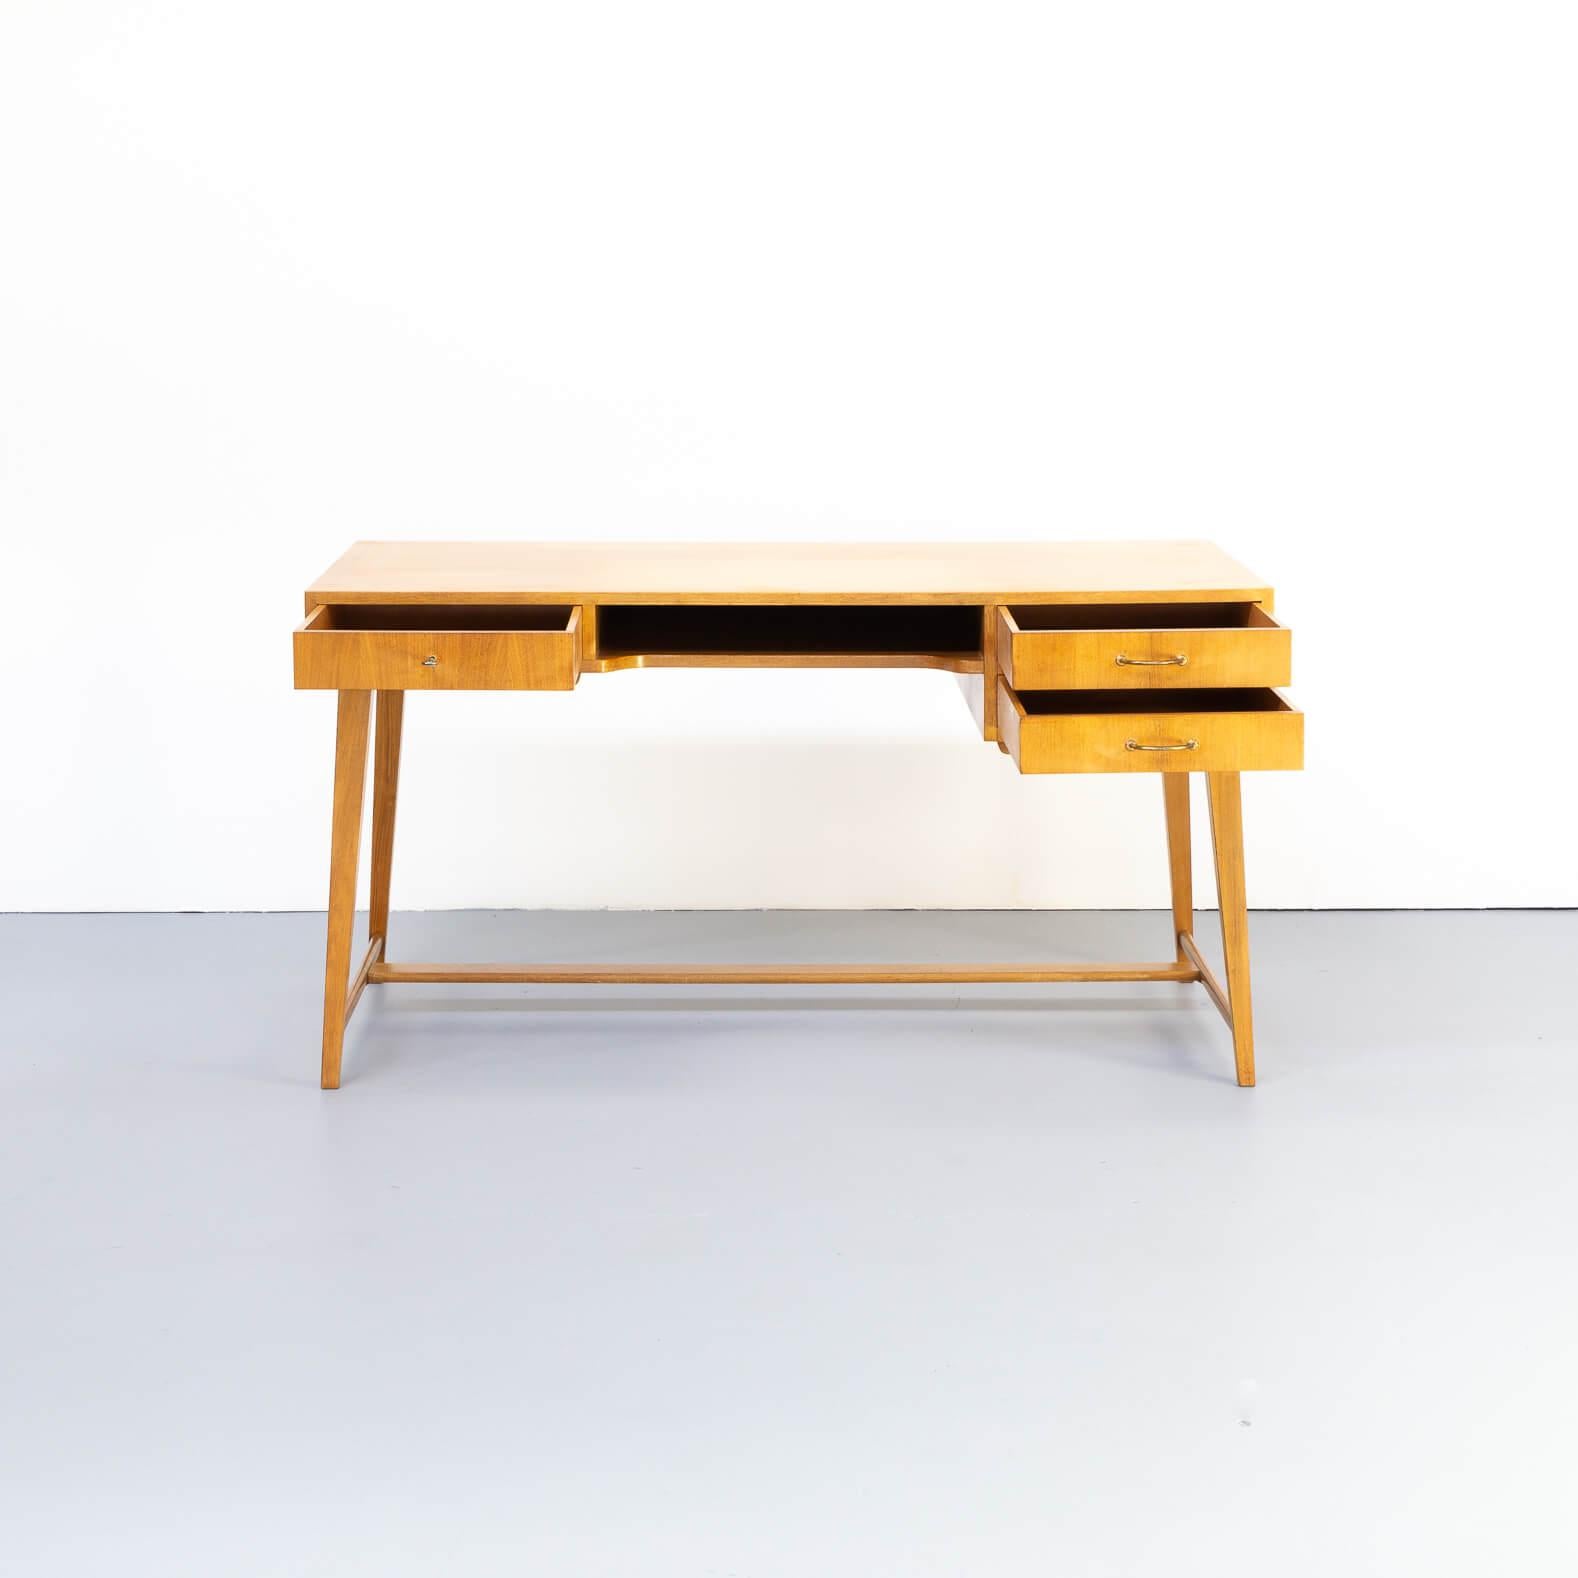 Georg Satink designed this model 468 deskin the 1950s for WK Möbel, the desk is beautiful on each visible side. Three drawers. Desk in good condition consistent with age and use.